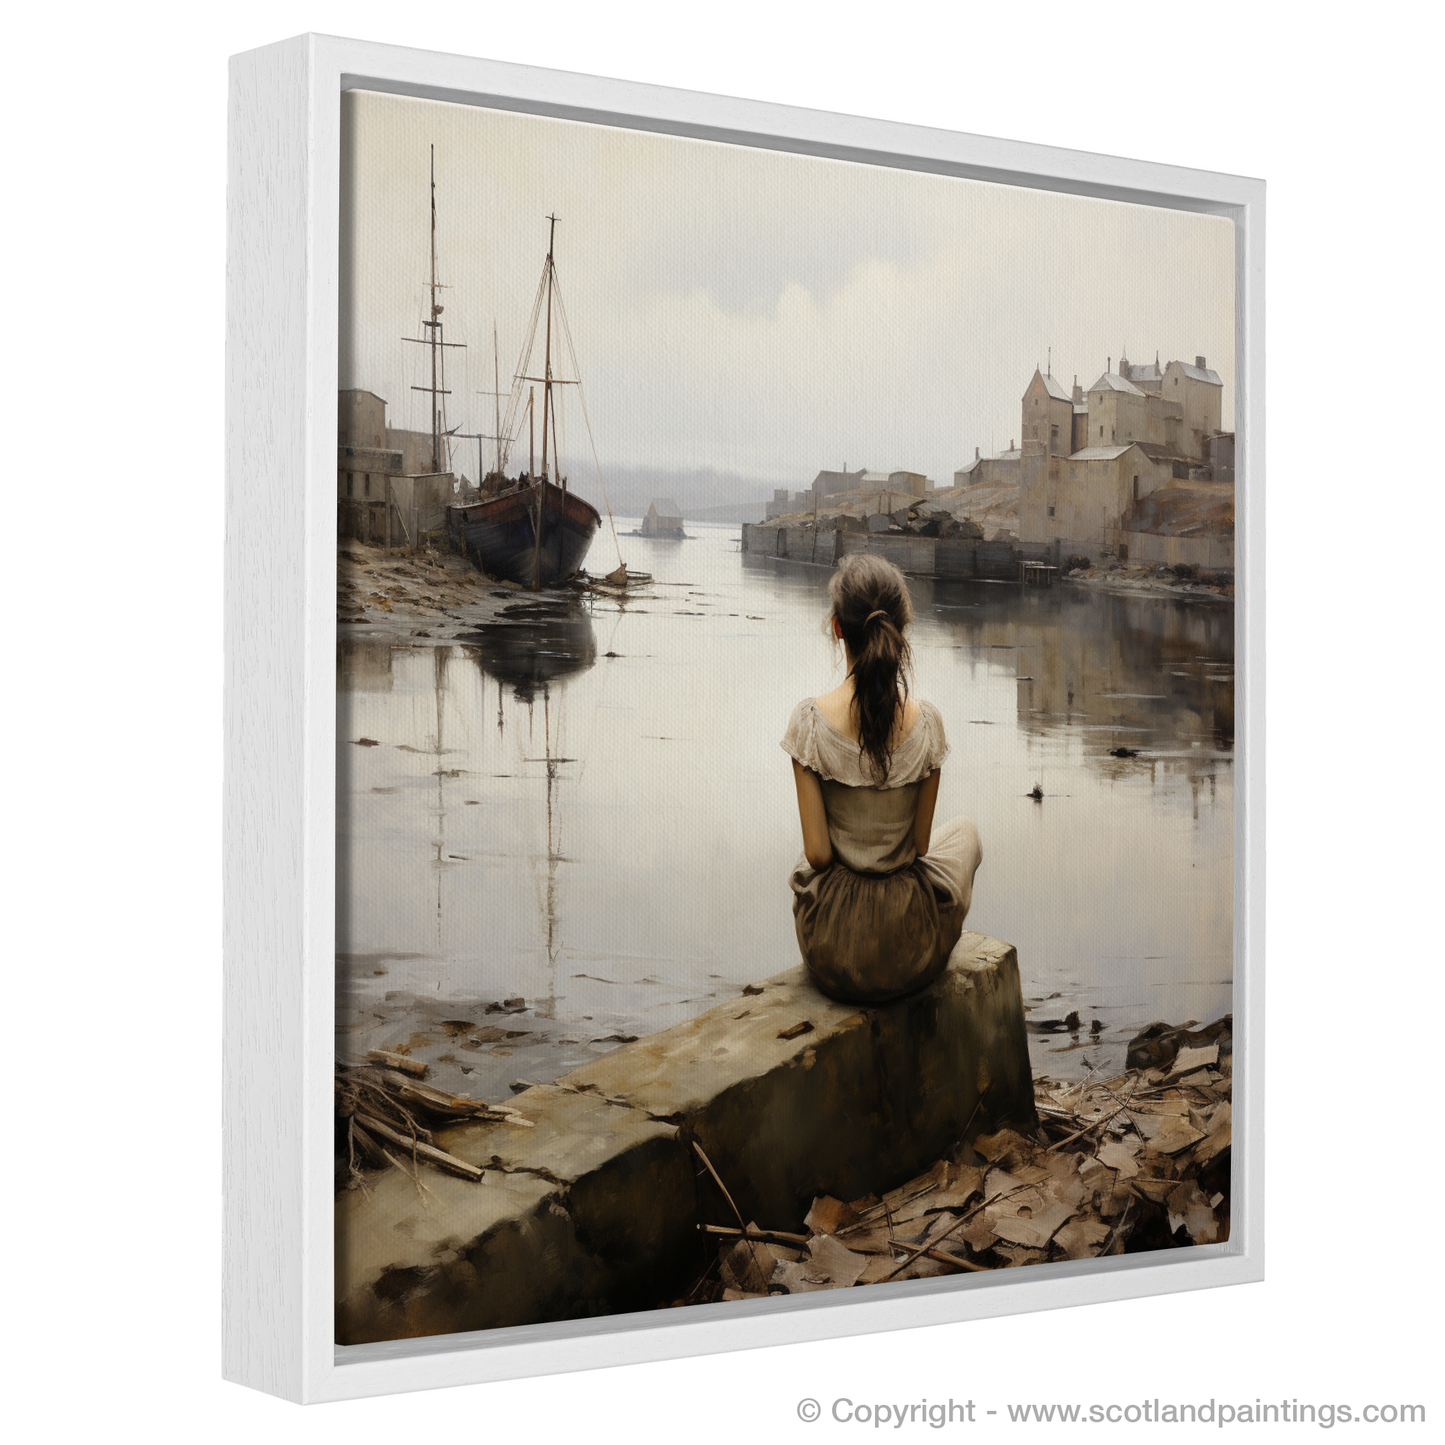 Harbourside Reflections: A Woman's Contemplation in Leith